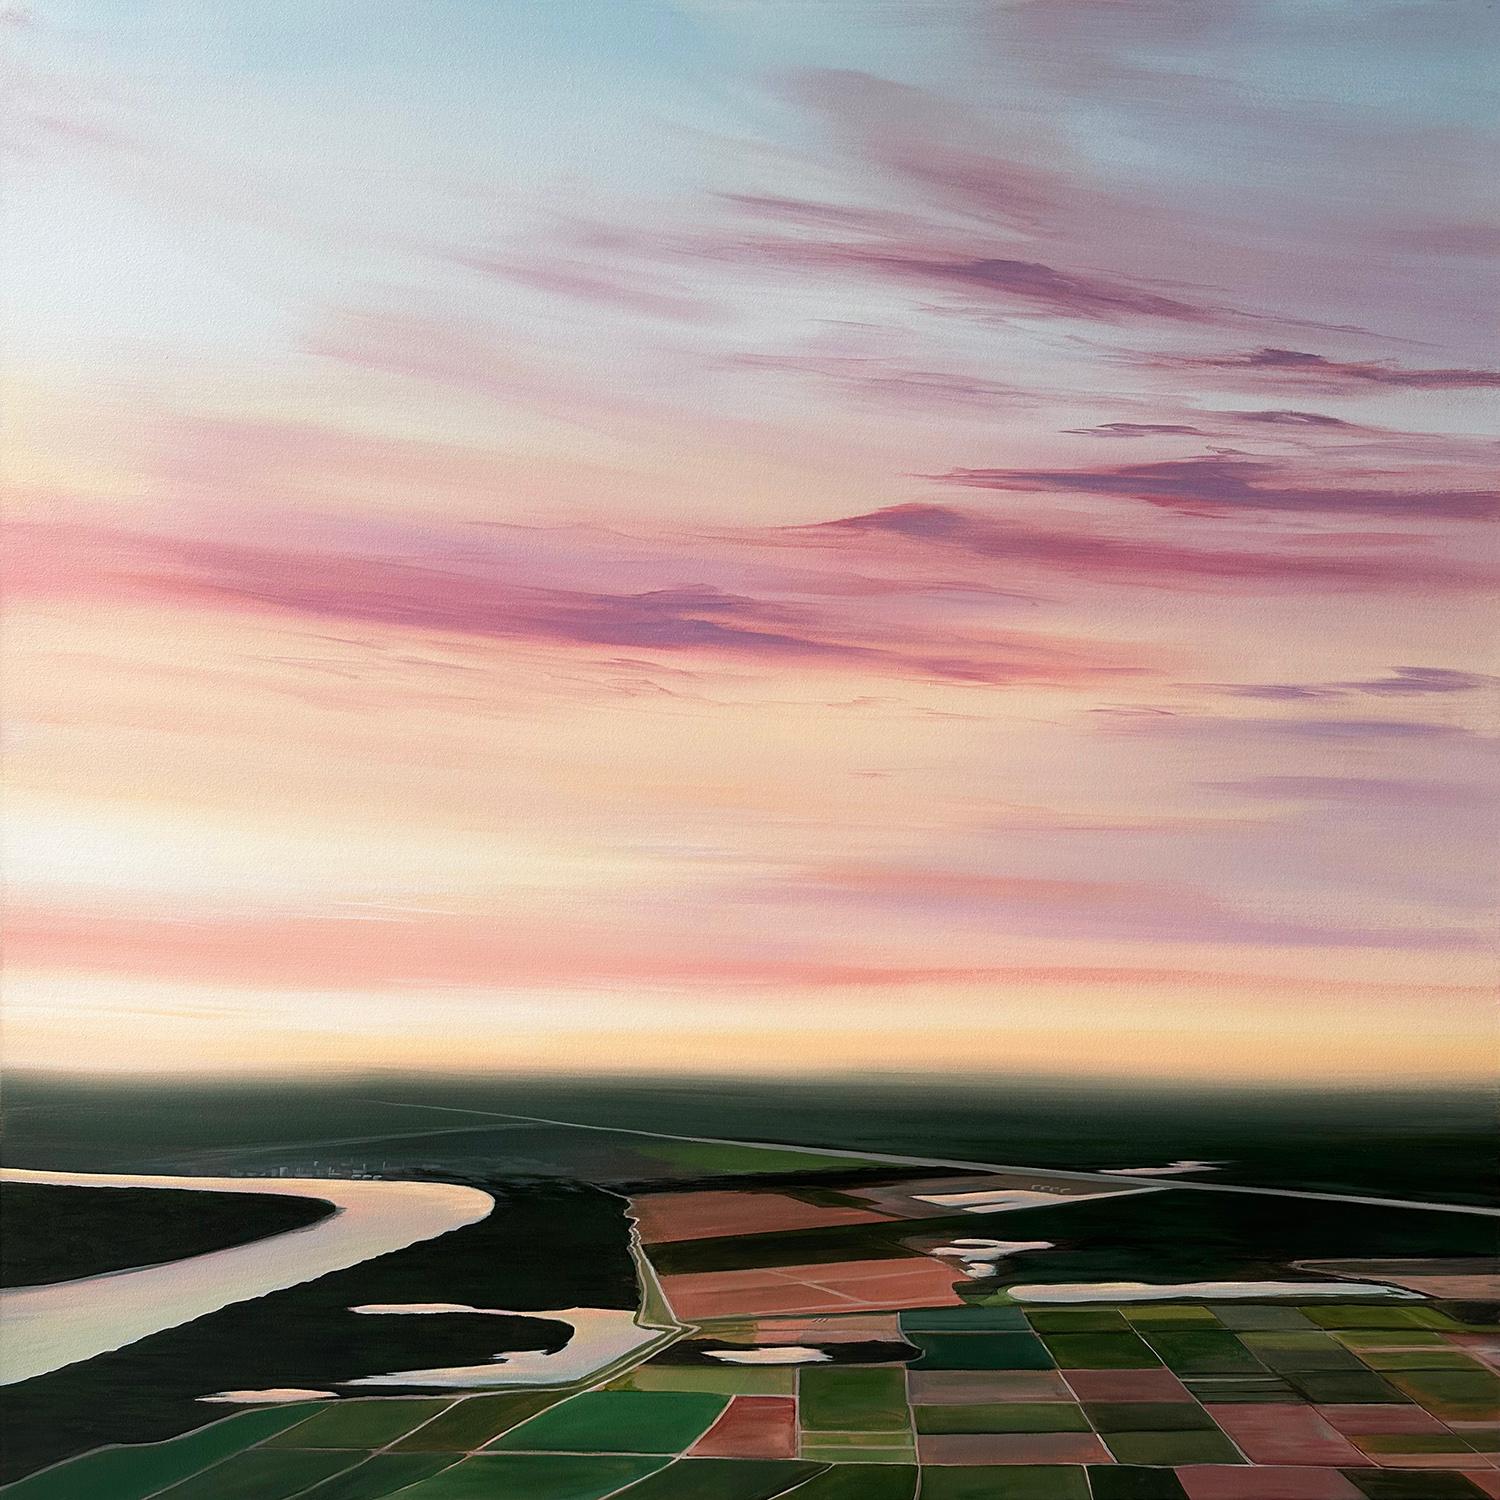 "Mississippi River (Sunrise)", by Kristin Moore, is a part of her 2024 solo exhibition, “Through the Bayou, Into the Garden”, at Ferrara Showman Gallery. Marking a transition from her previous work, "Mississippi River (Sunrise)" shows Kristin Moore